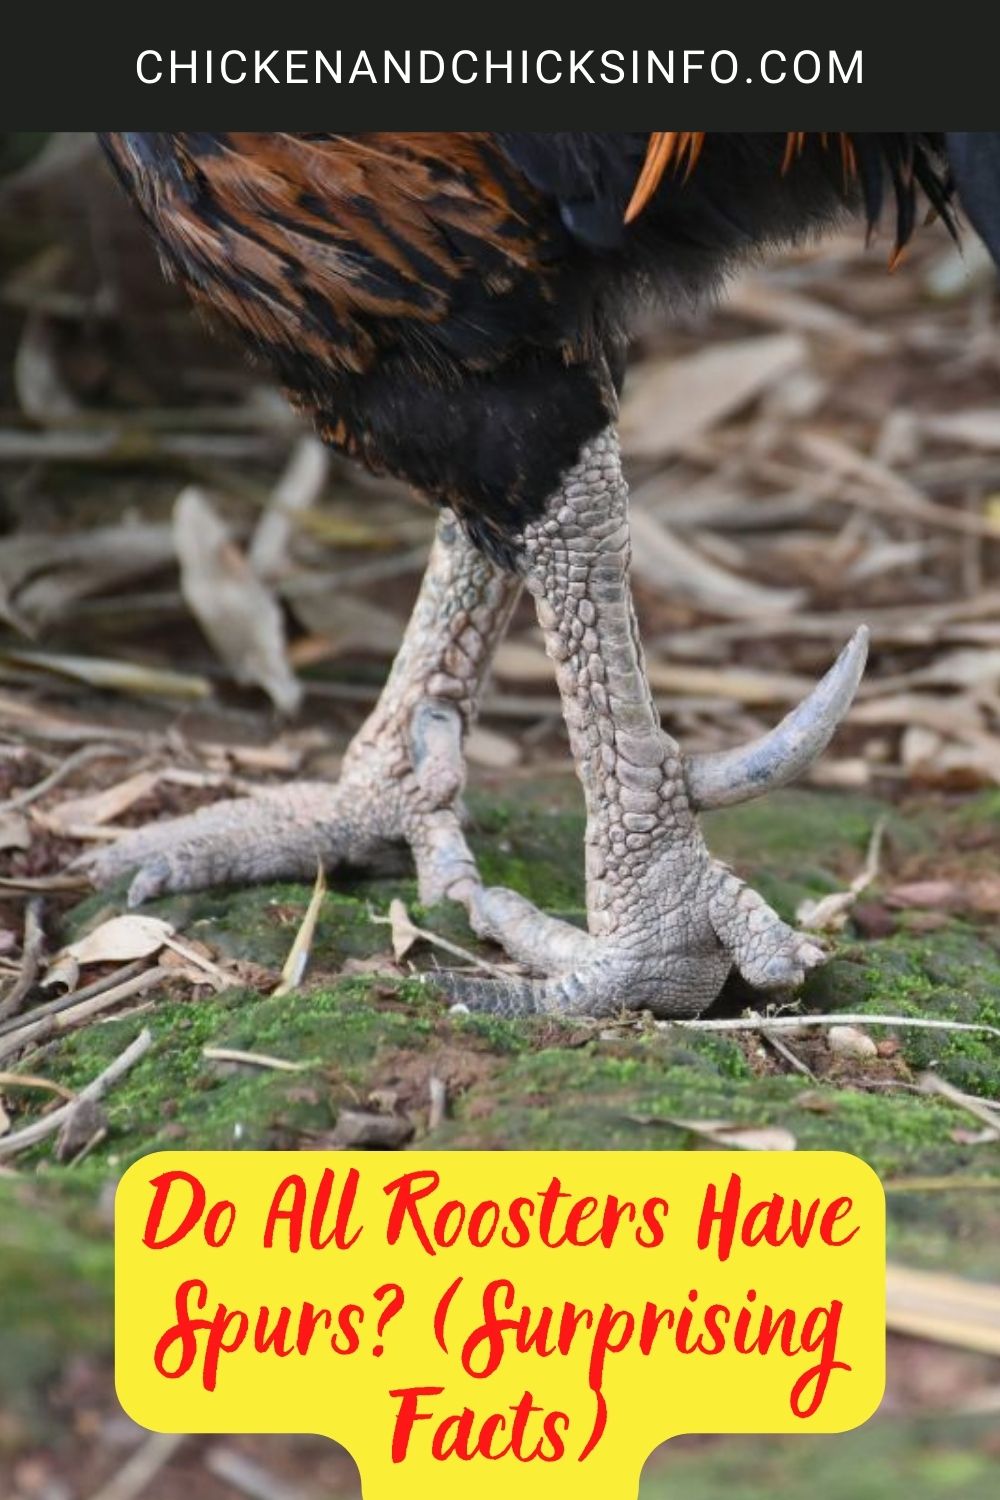 Do All Roosters Have Spurs? (Surprising Facts) poster.
